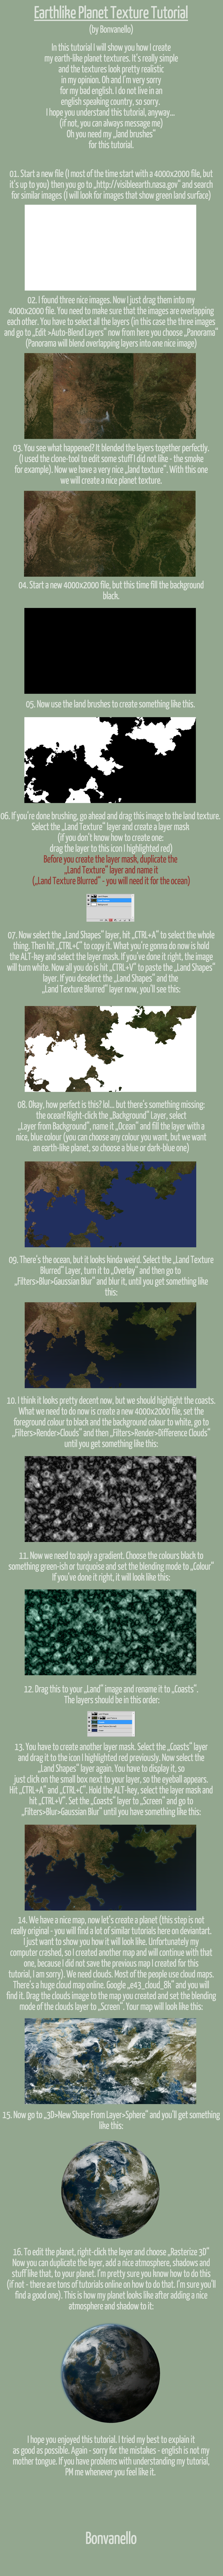 earth_like_planet__texture_tutorial_by_bonvanello-d53a0v4.png